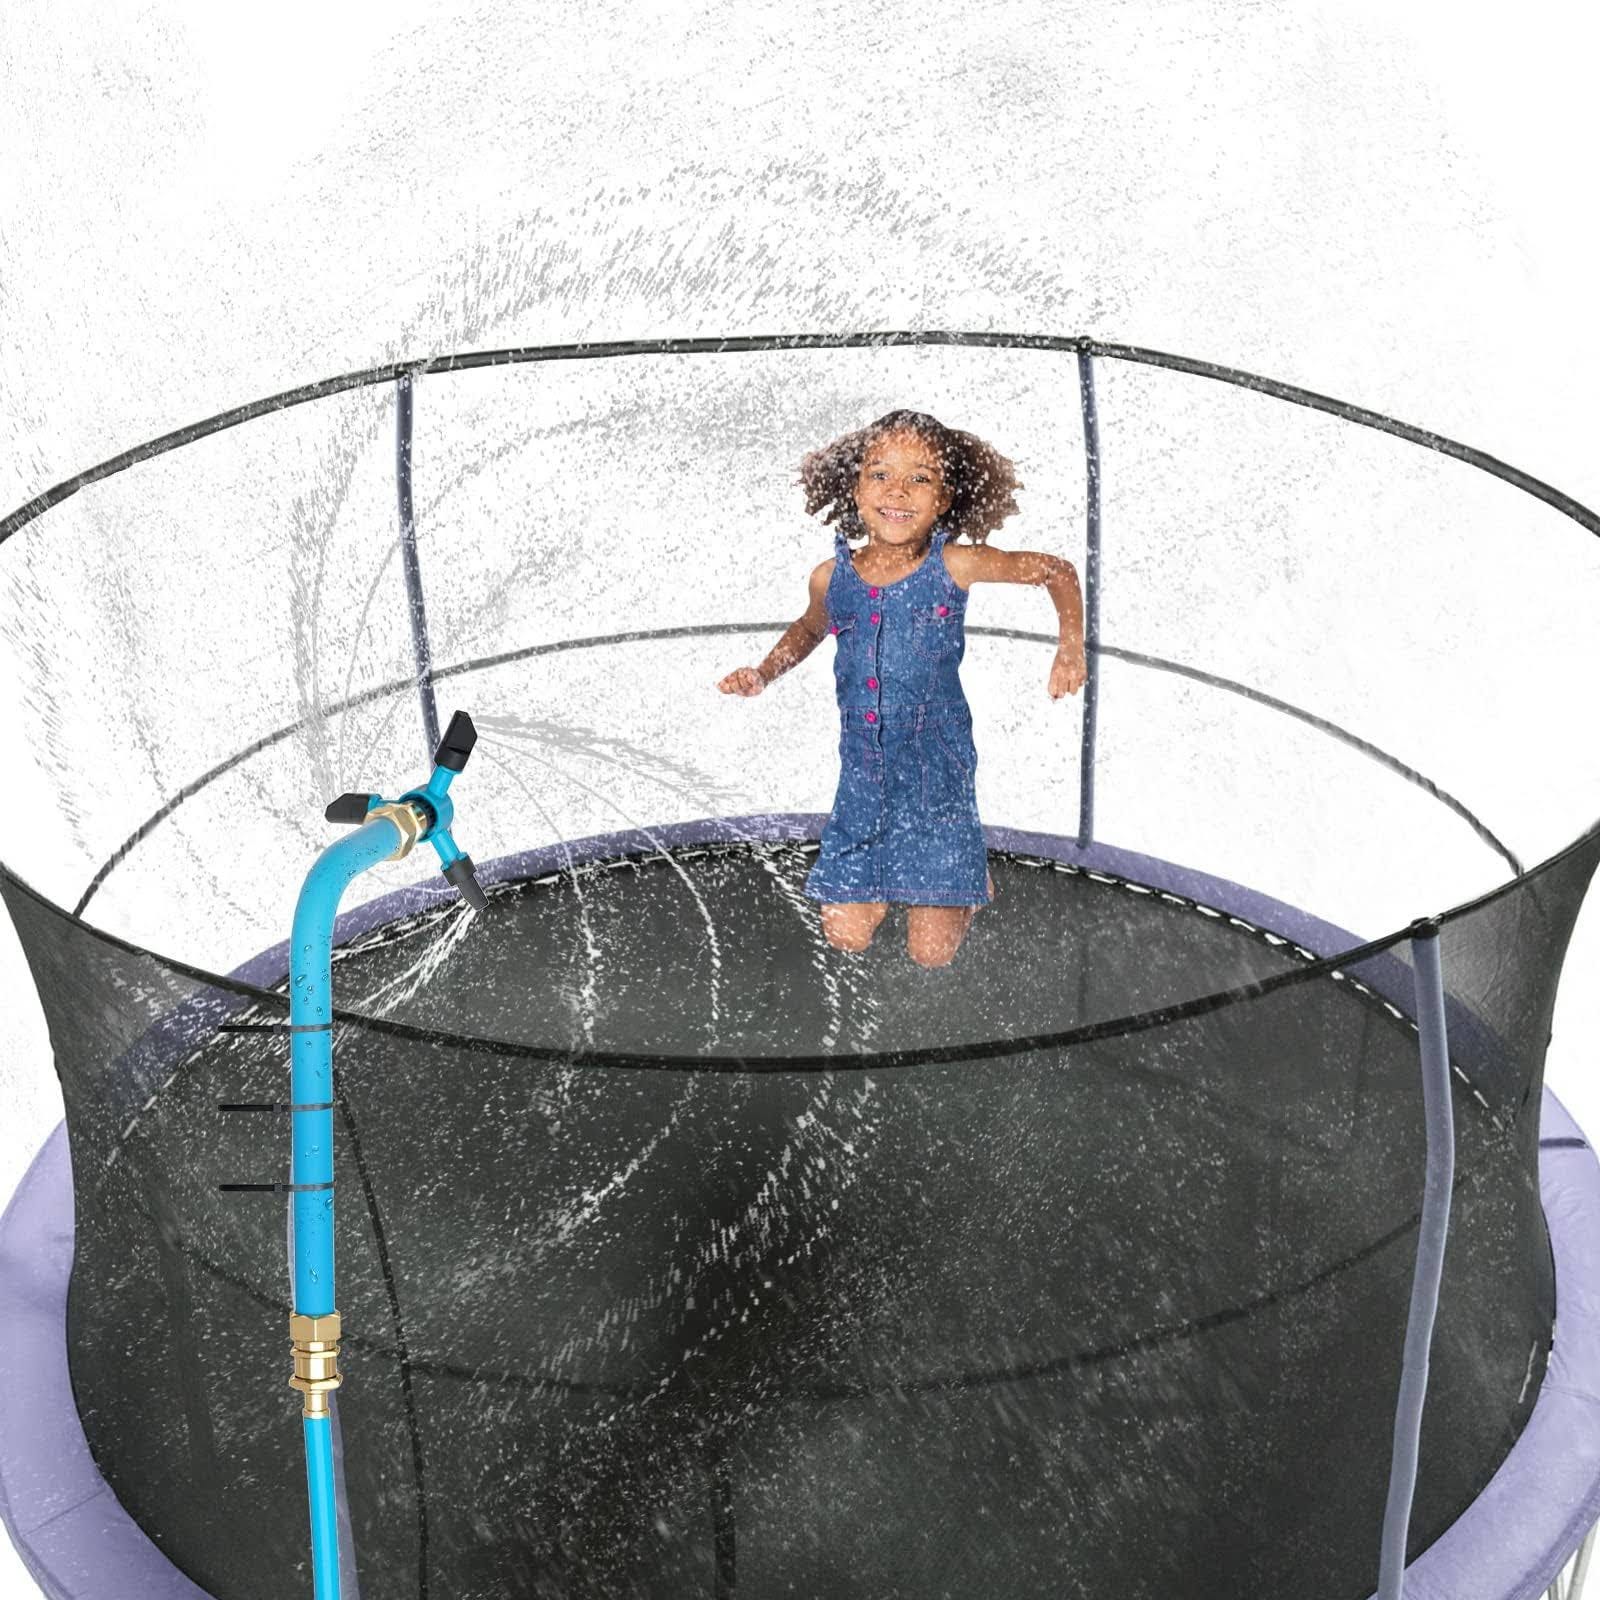 STFLY Trampoline Water Sprinkler: A Fun and High-Quality 360-Degree Water Jet for All-Ages Entertainment and Summertime Cools | Image